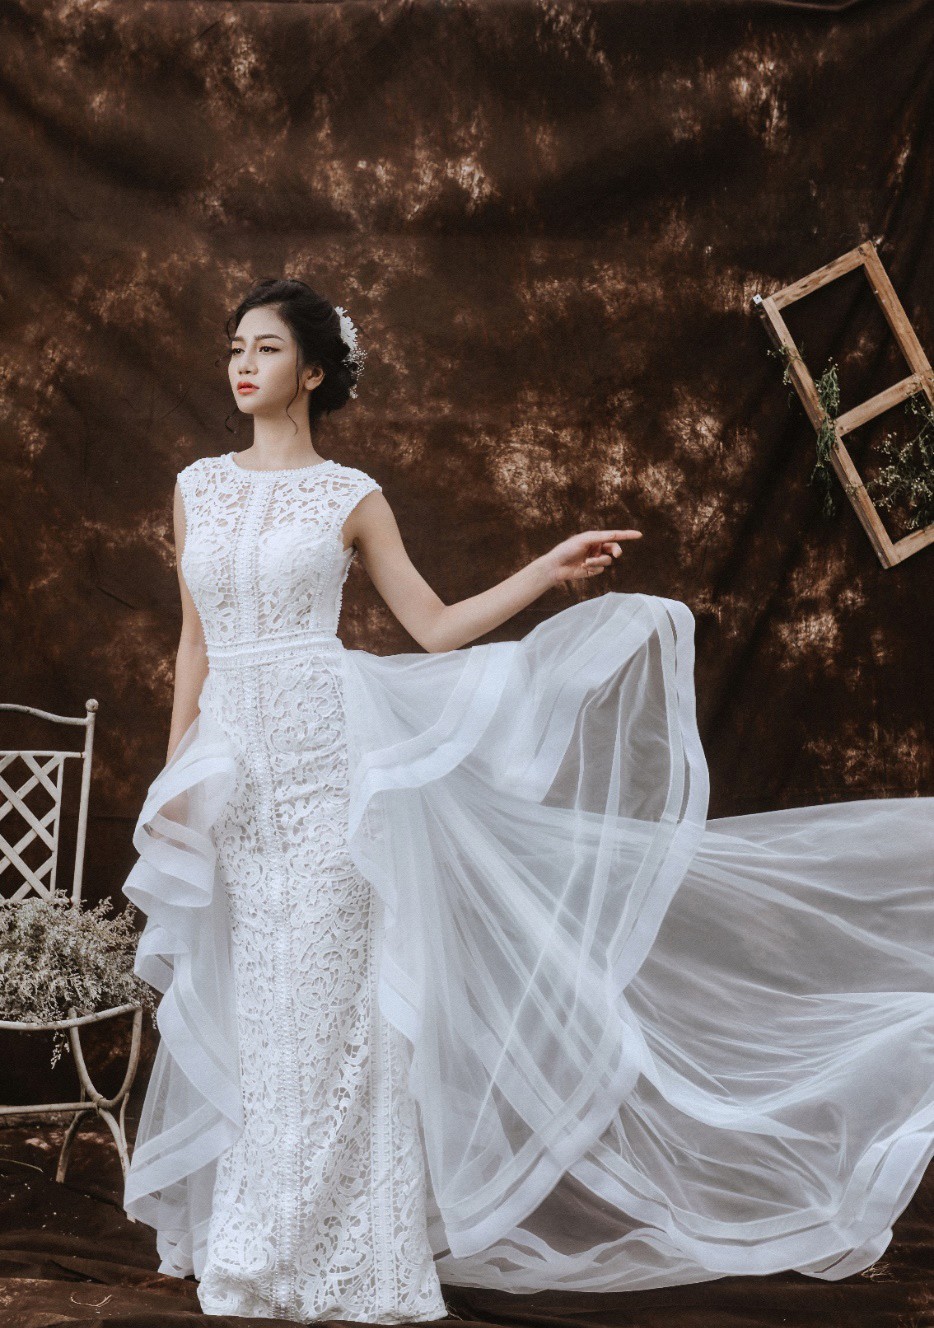 5 gorgeous wedding dress trends for 2022 - 3